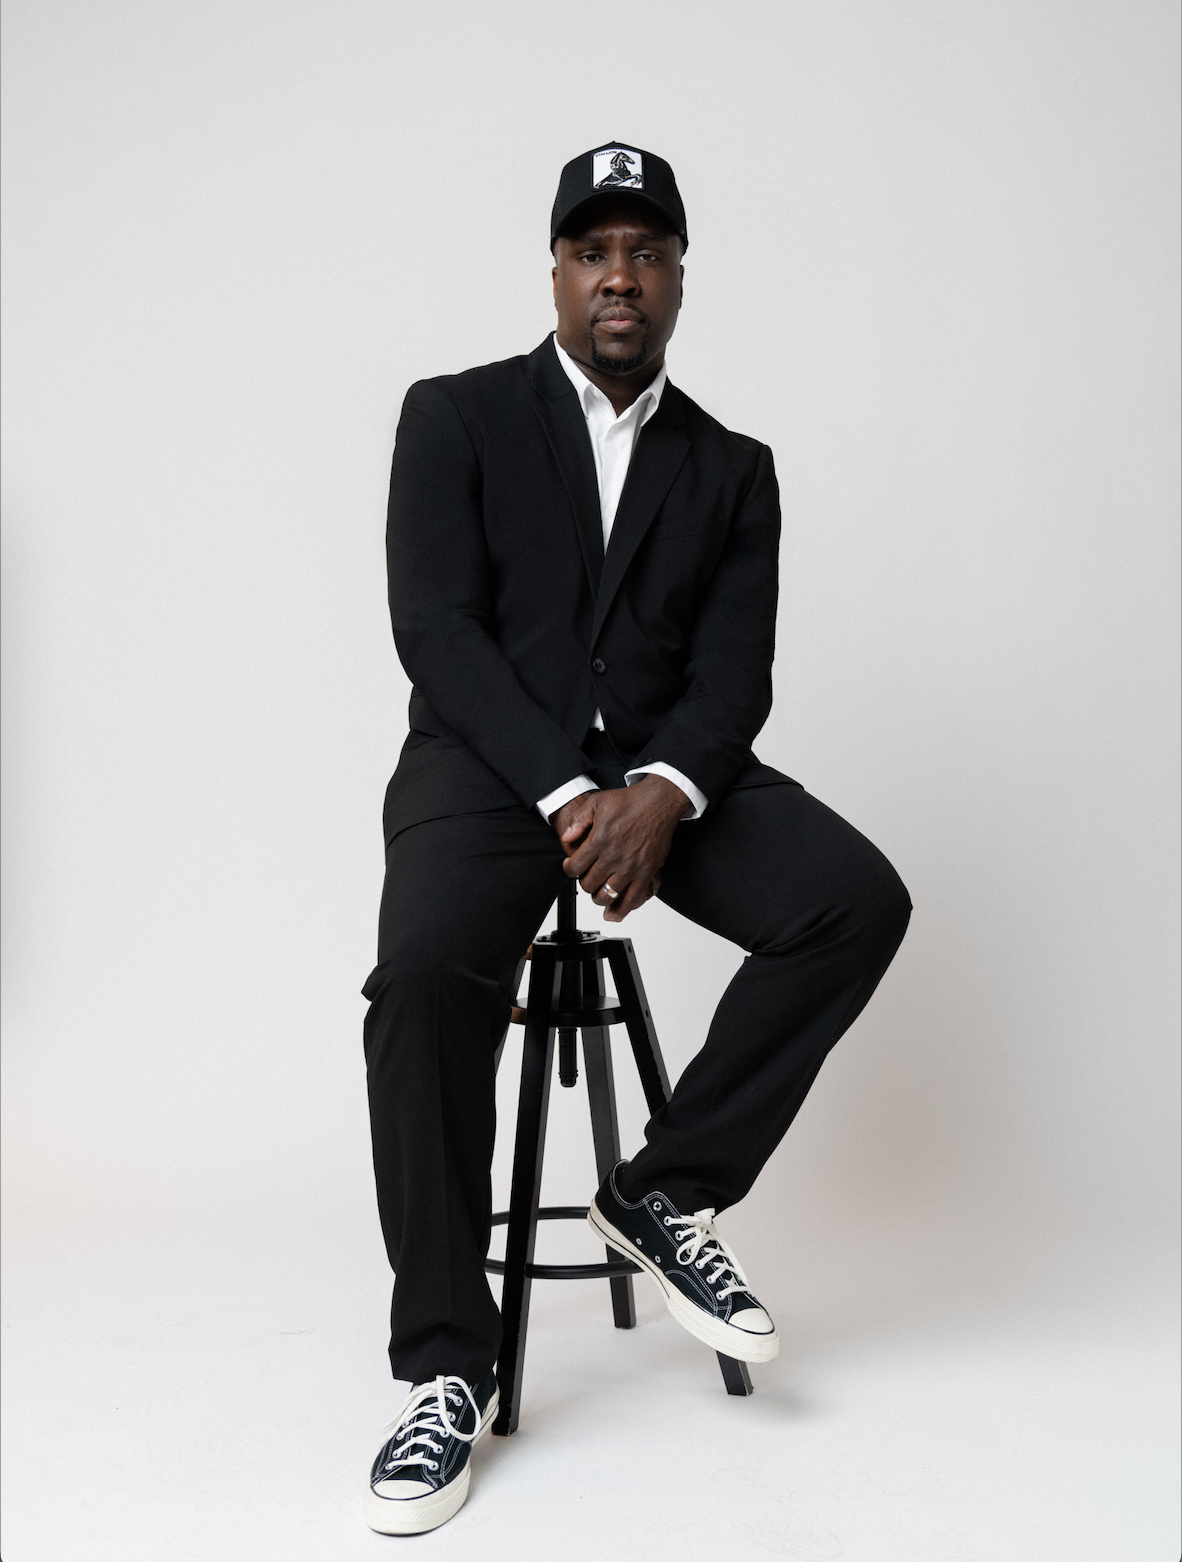 Image of musician Derrick Hodge wearing a black suit and black baseball cap. Derrick is sitting on a black stool in a white studio space. 